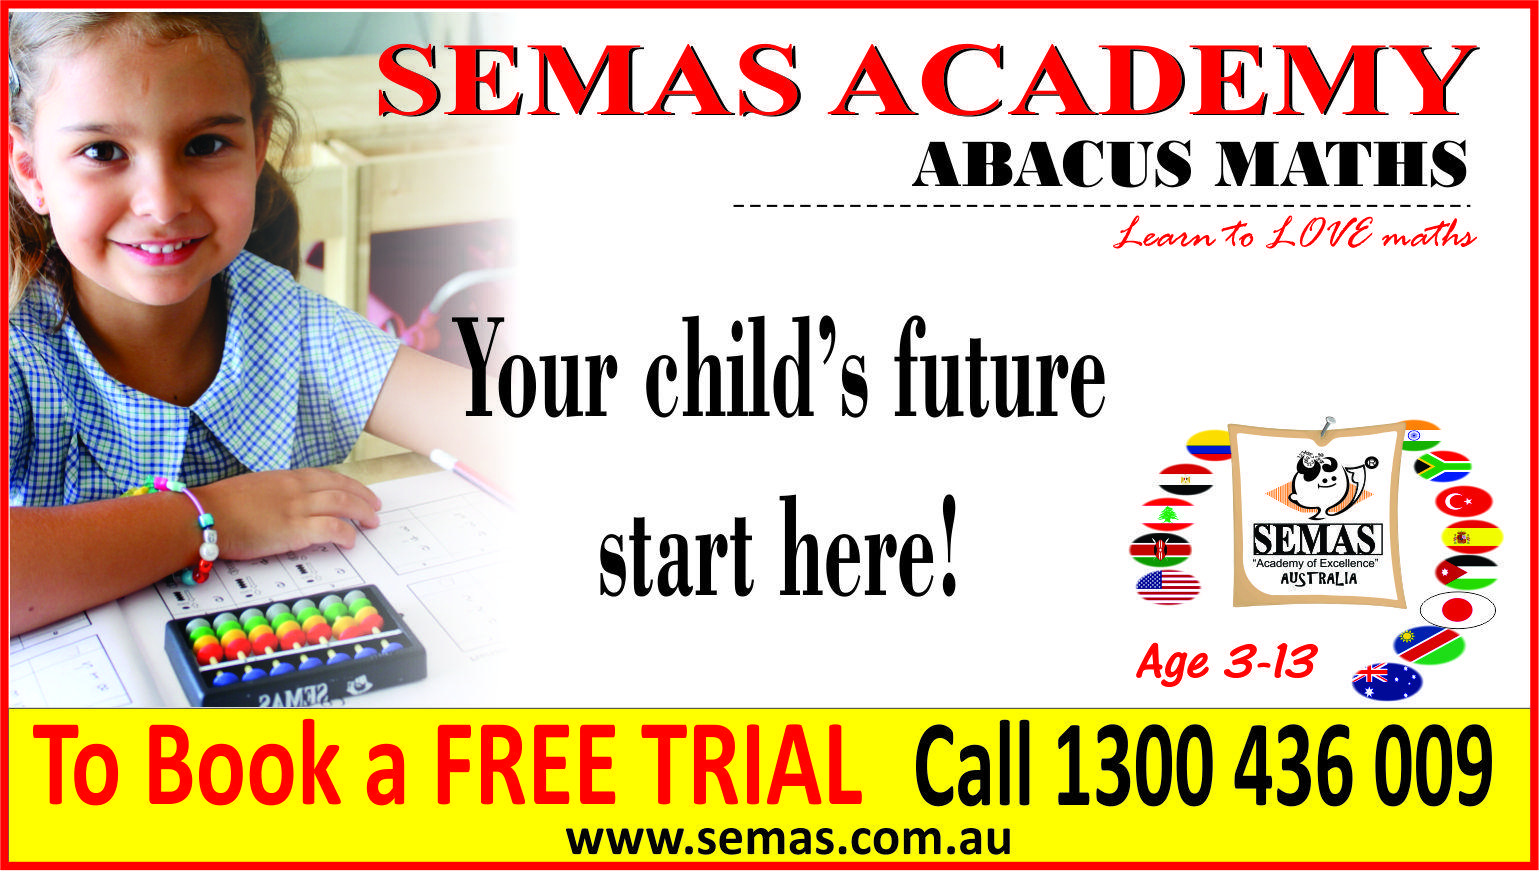 ABACUS MATHS program for 3-4 year olds, preschoolers (free trial)